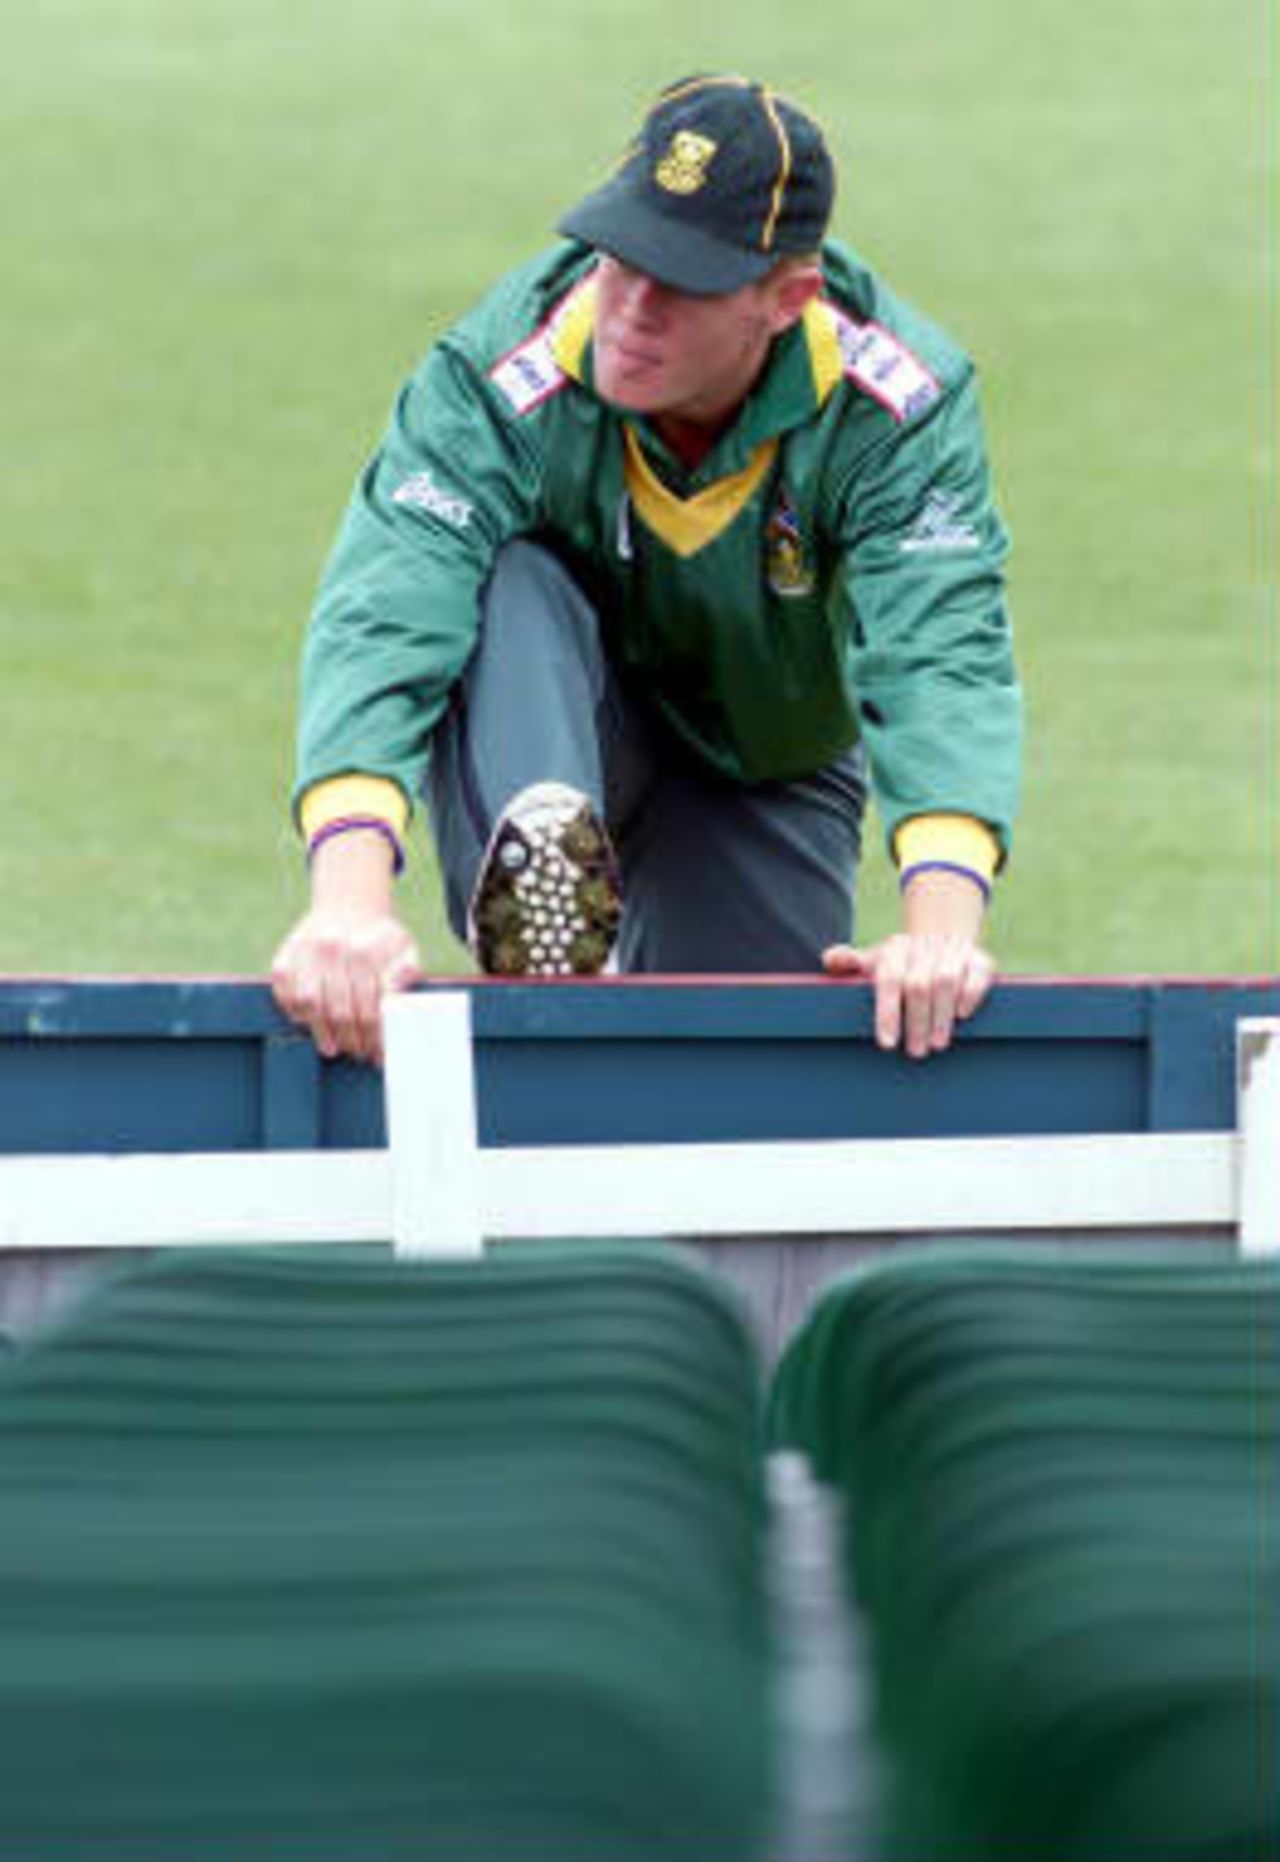 Shaun Pollock stretches during training at Hove 06 May 1999 in preparation for the World Cup